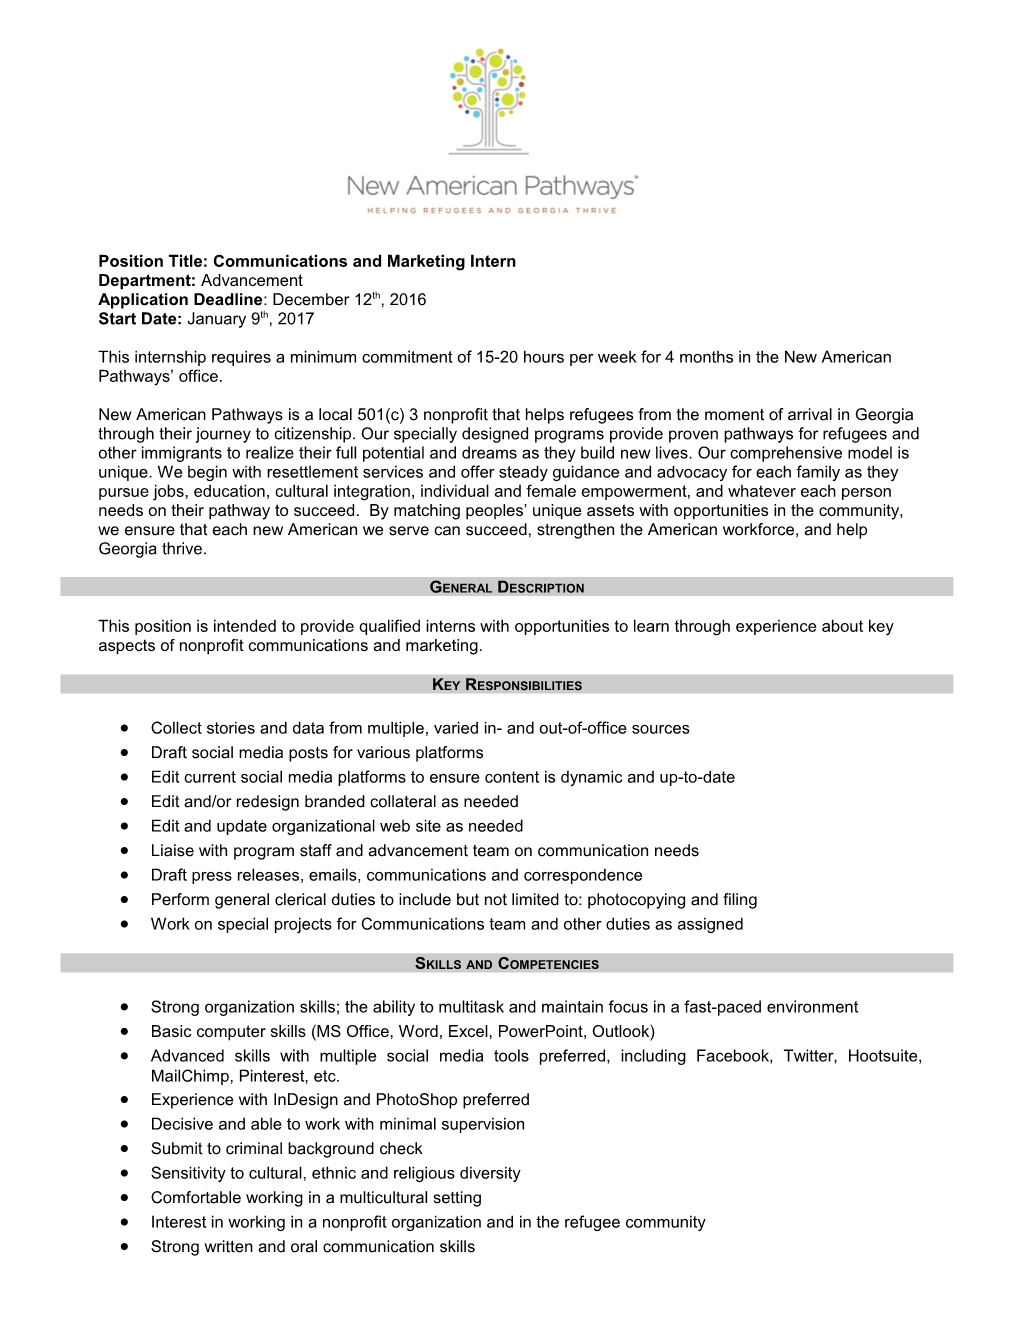 Position Title: Learning Center Programs Coordinator